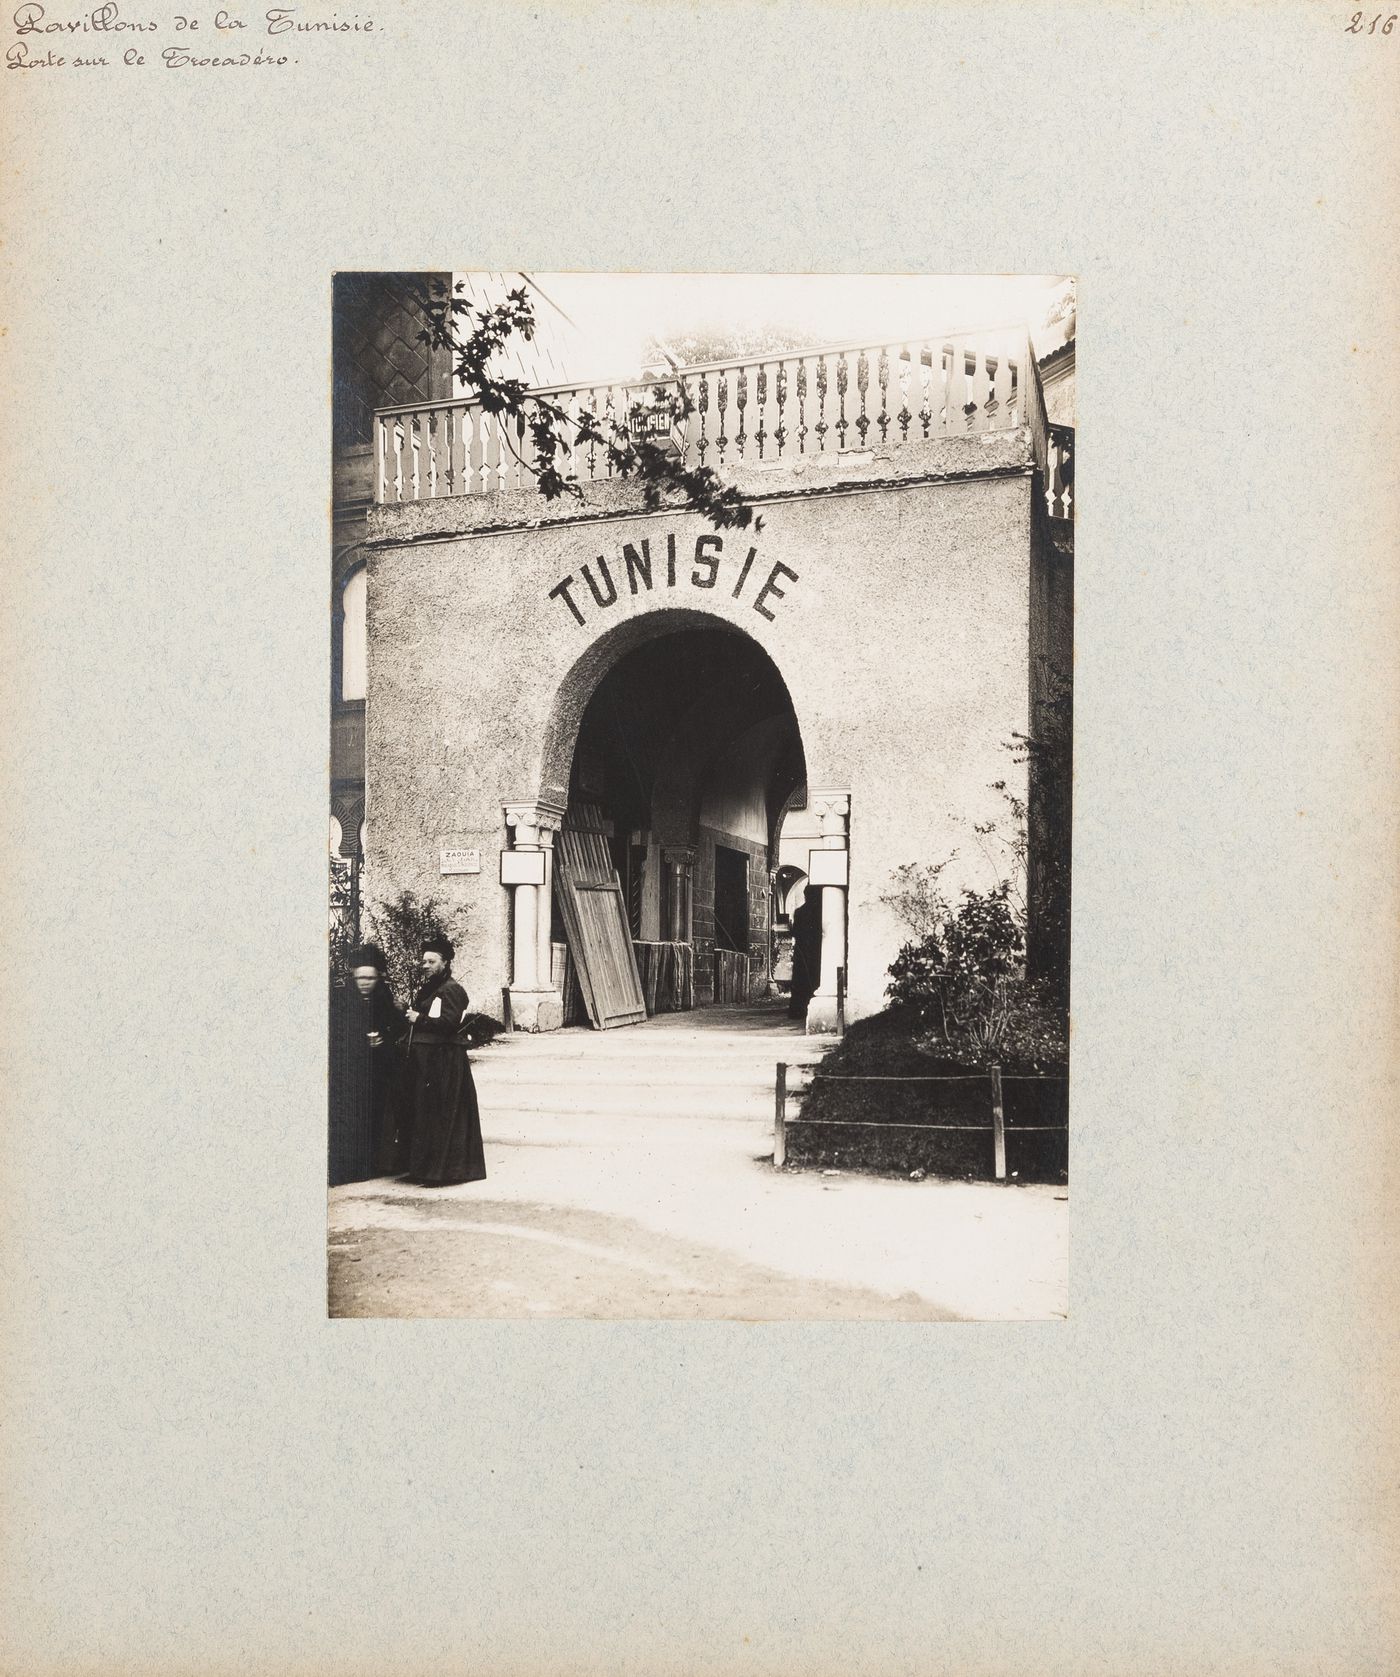 View of gateway to Tunisian section, Exposition universelle, 1900, Paris, France